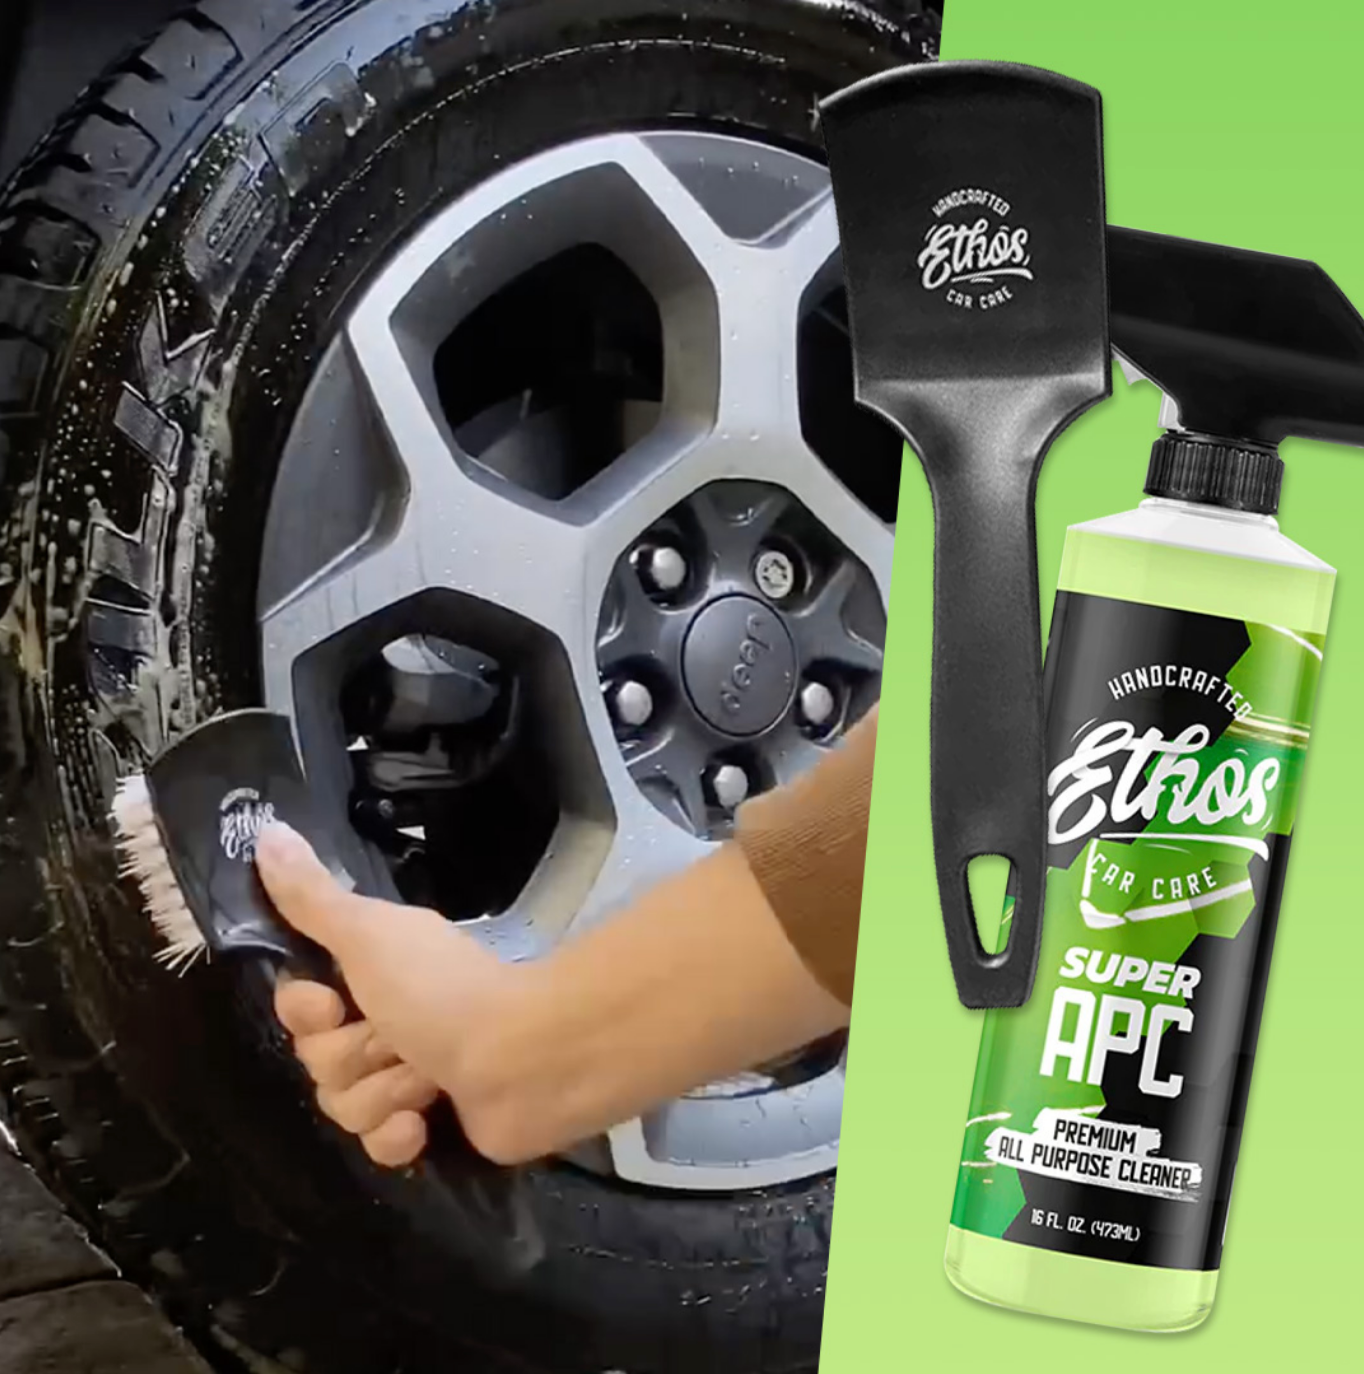 Ethos Car Care Wheel Cleaning Brushes, Tire Cleaning Brush